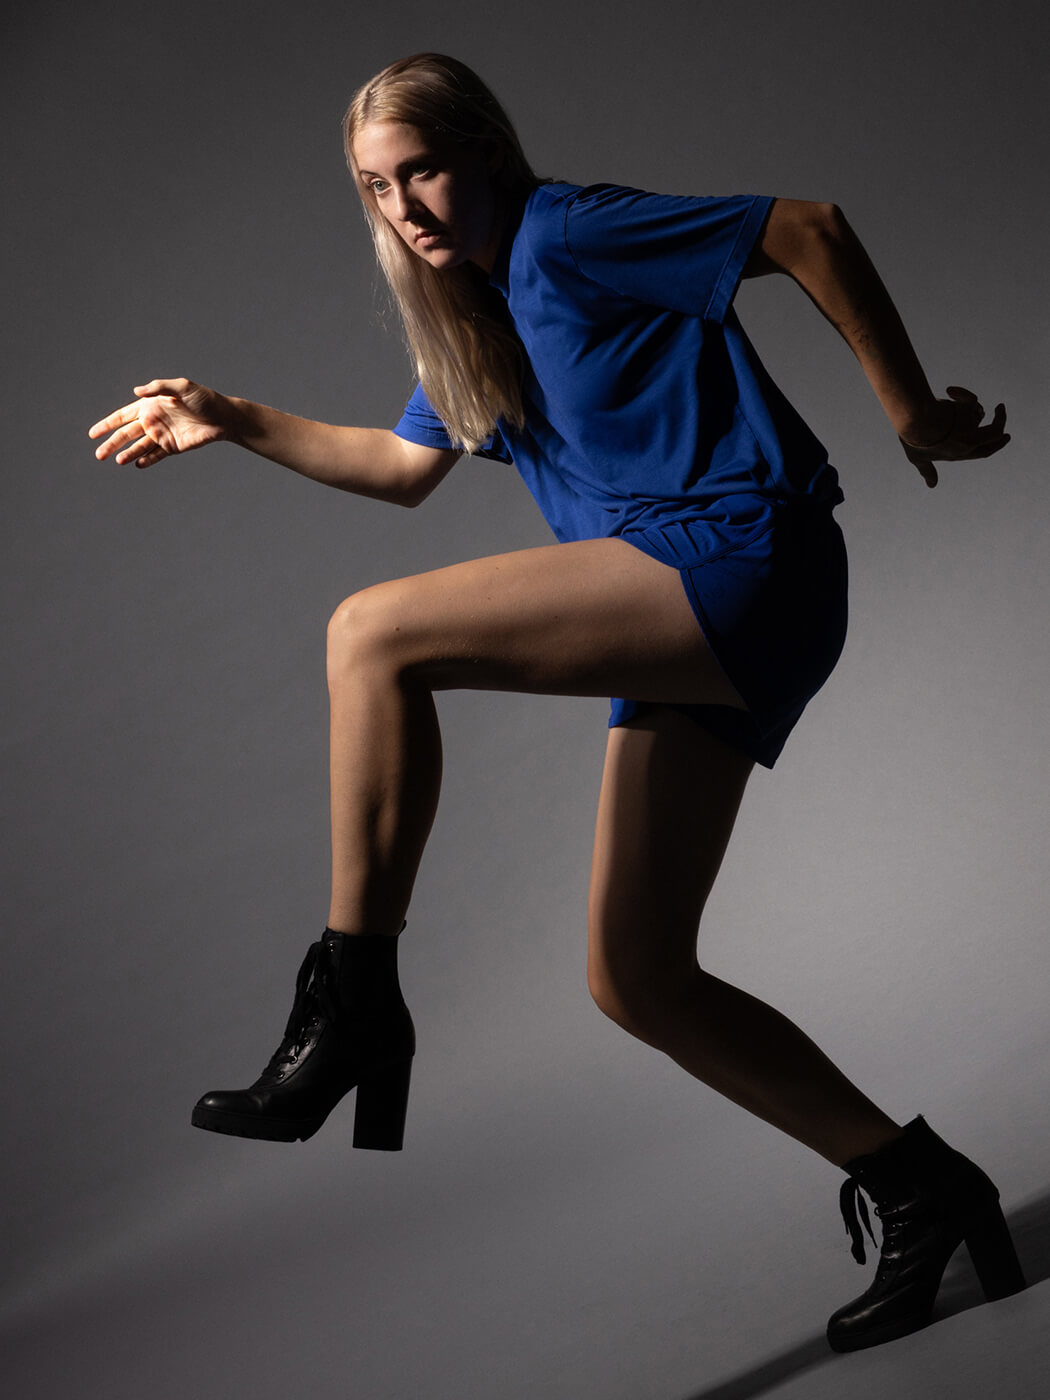 Torres in a blue outfit with her arms out, photo by Ebru Yildiz